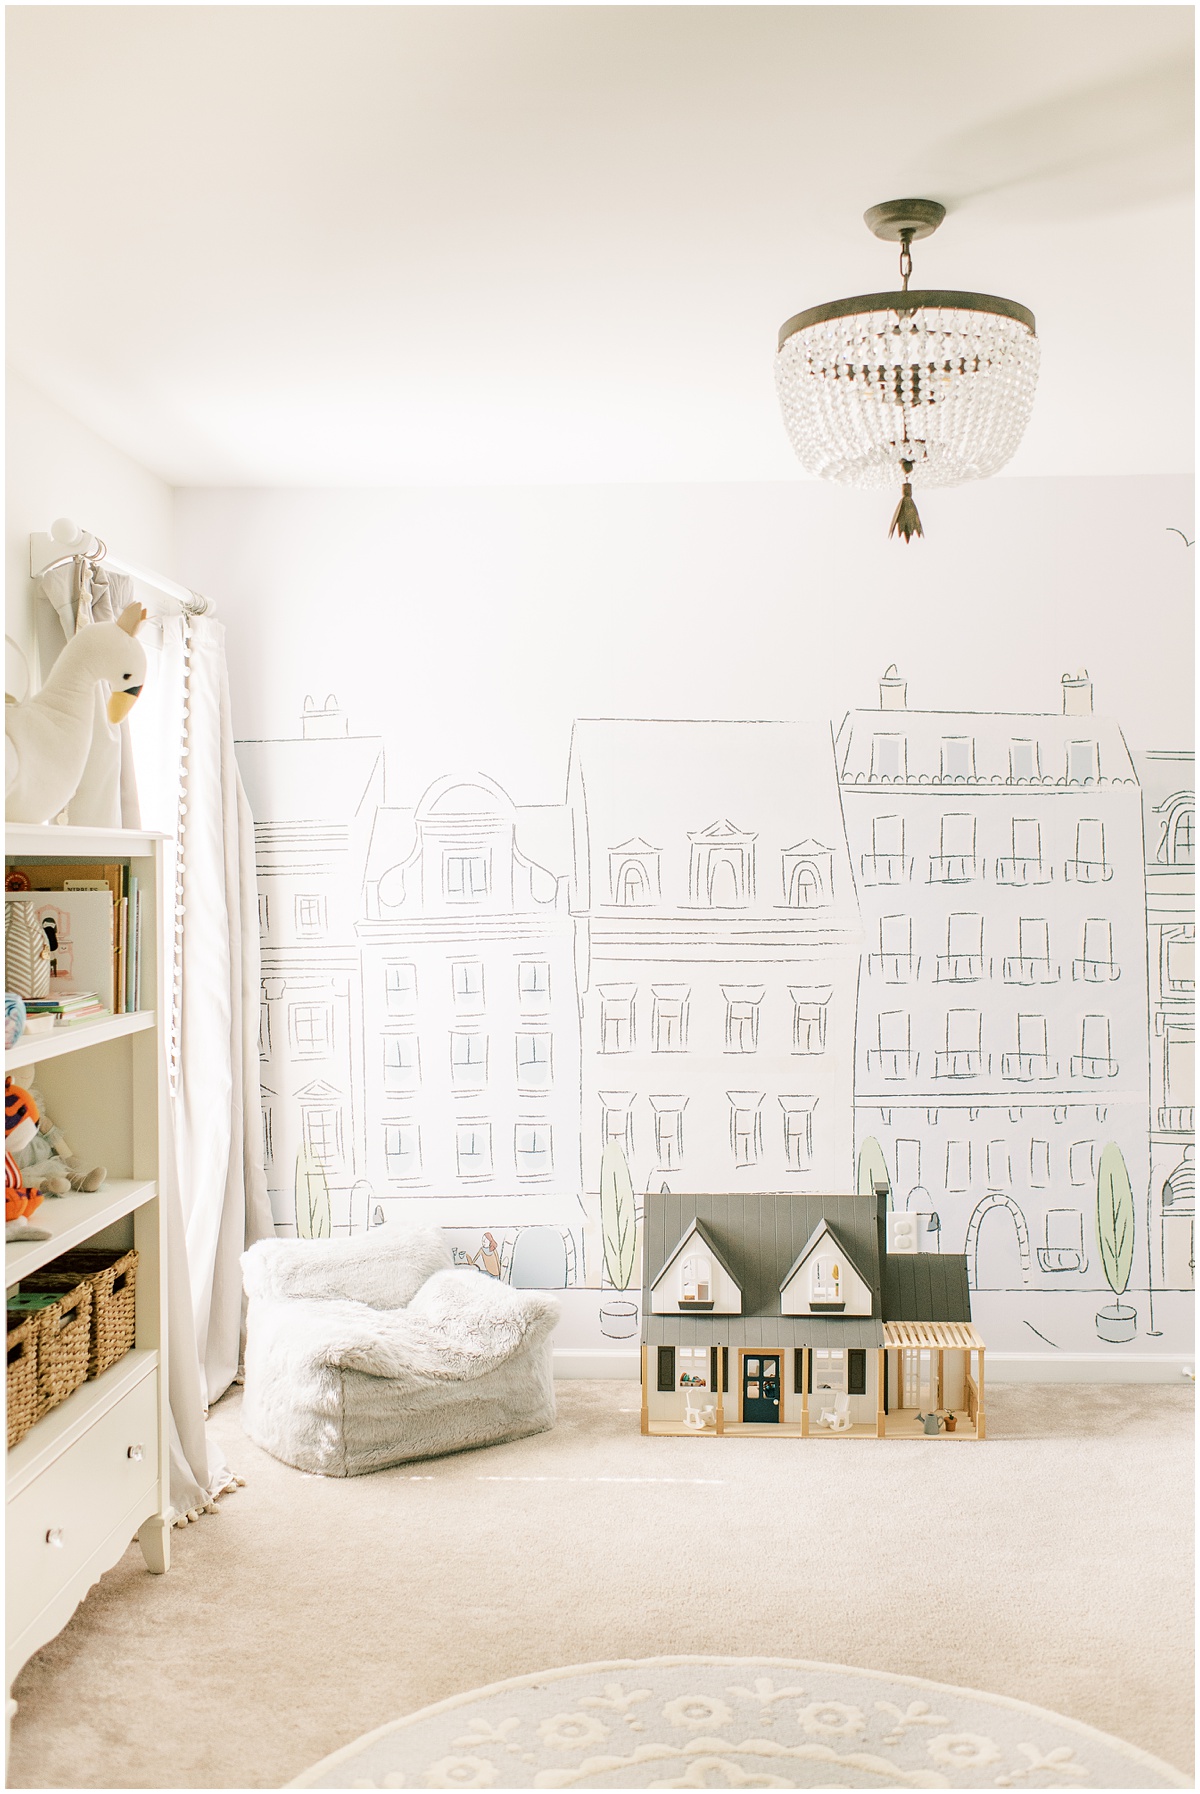 Toddler Paris theme room with white and grey details